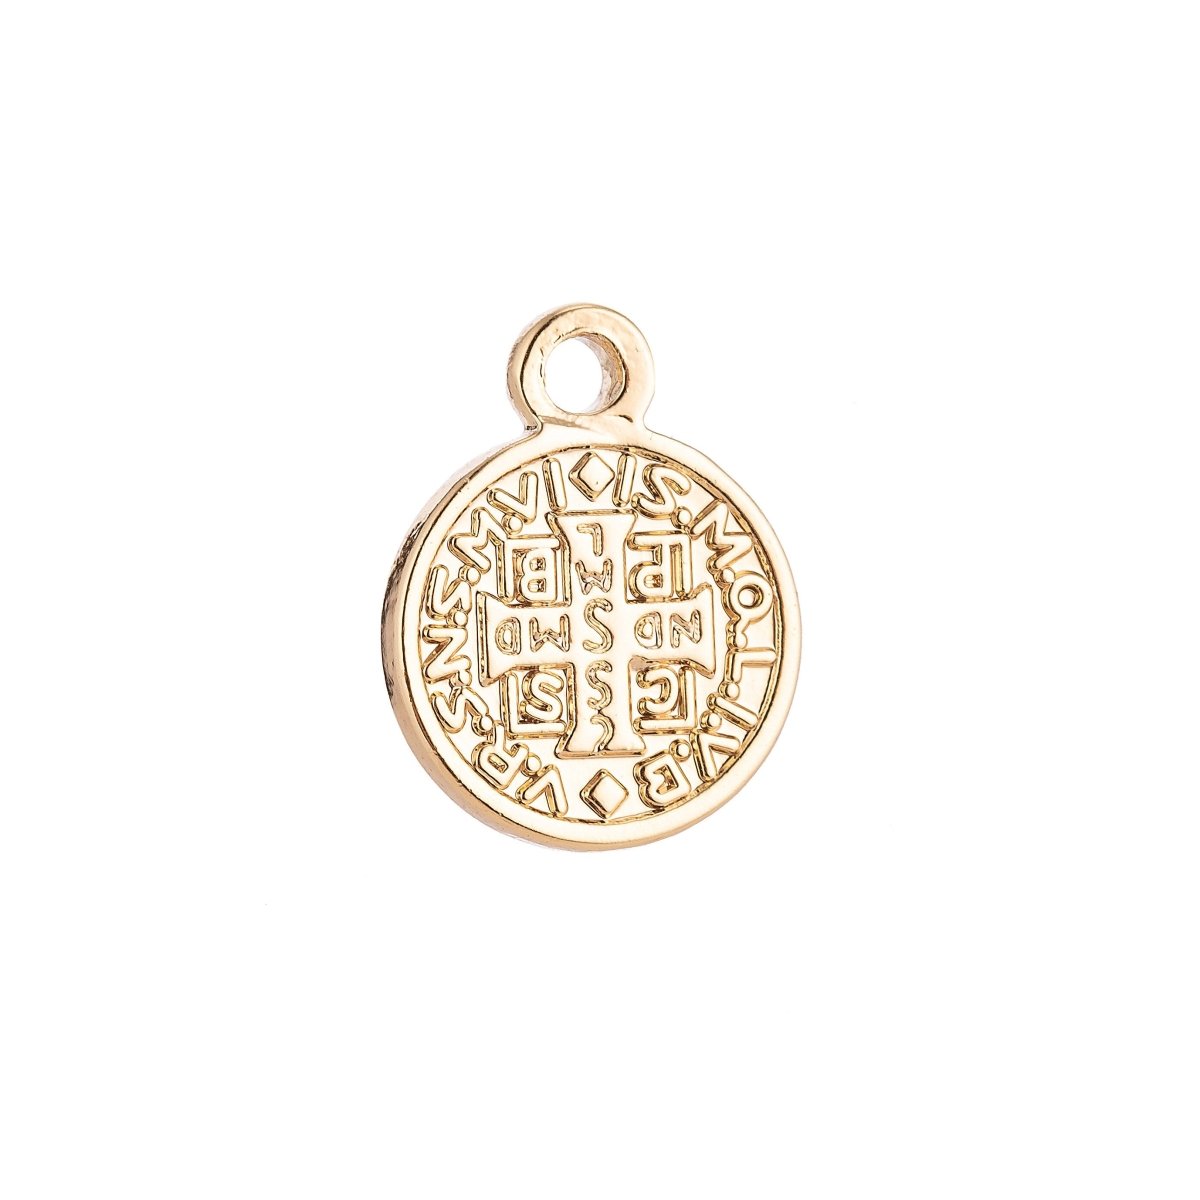 Virtute Tua Fiat Pax in (May there be peace in your strength) Pendant Charm Gold Filled C-007 C-298 - DLUXCA